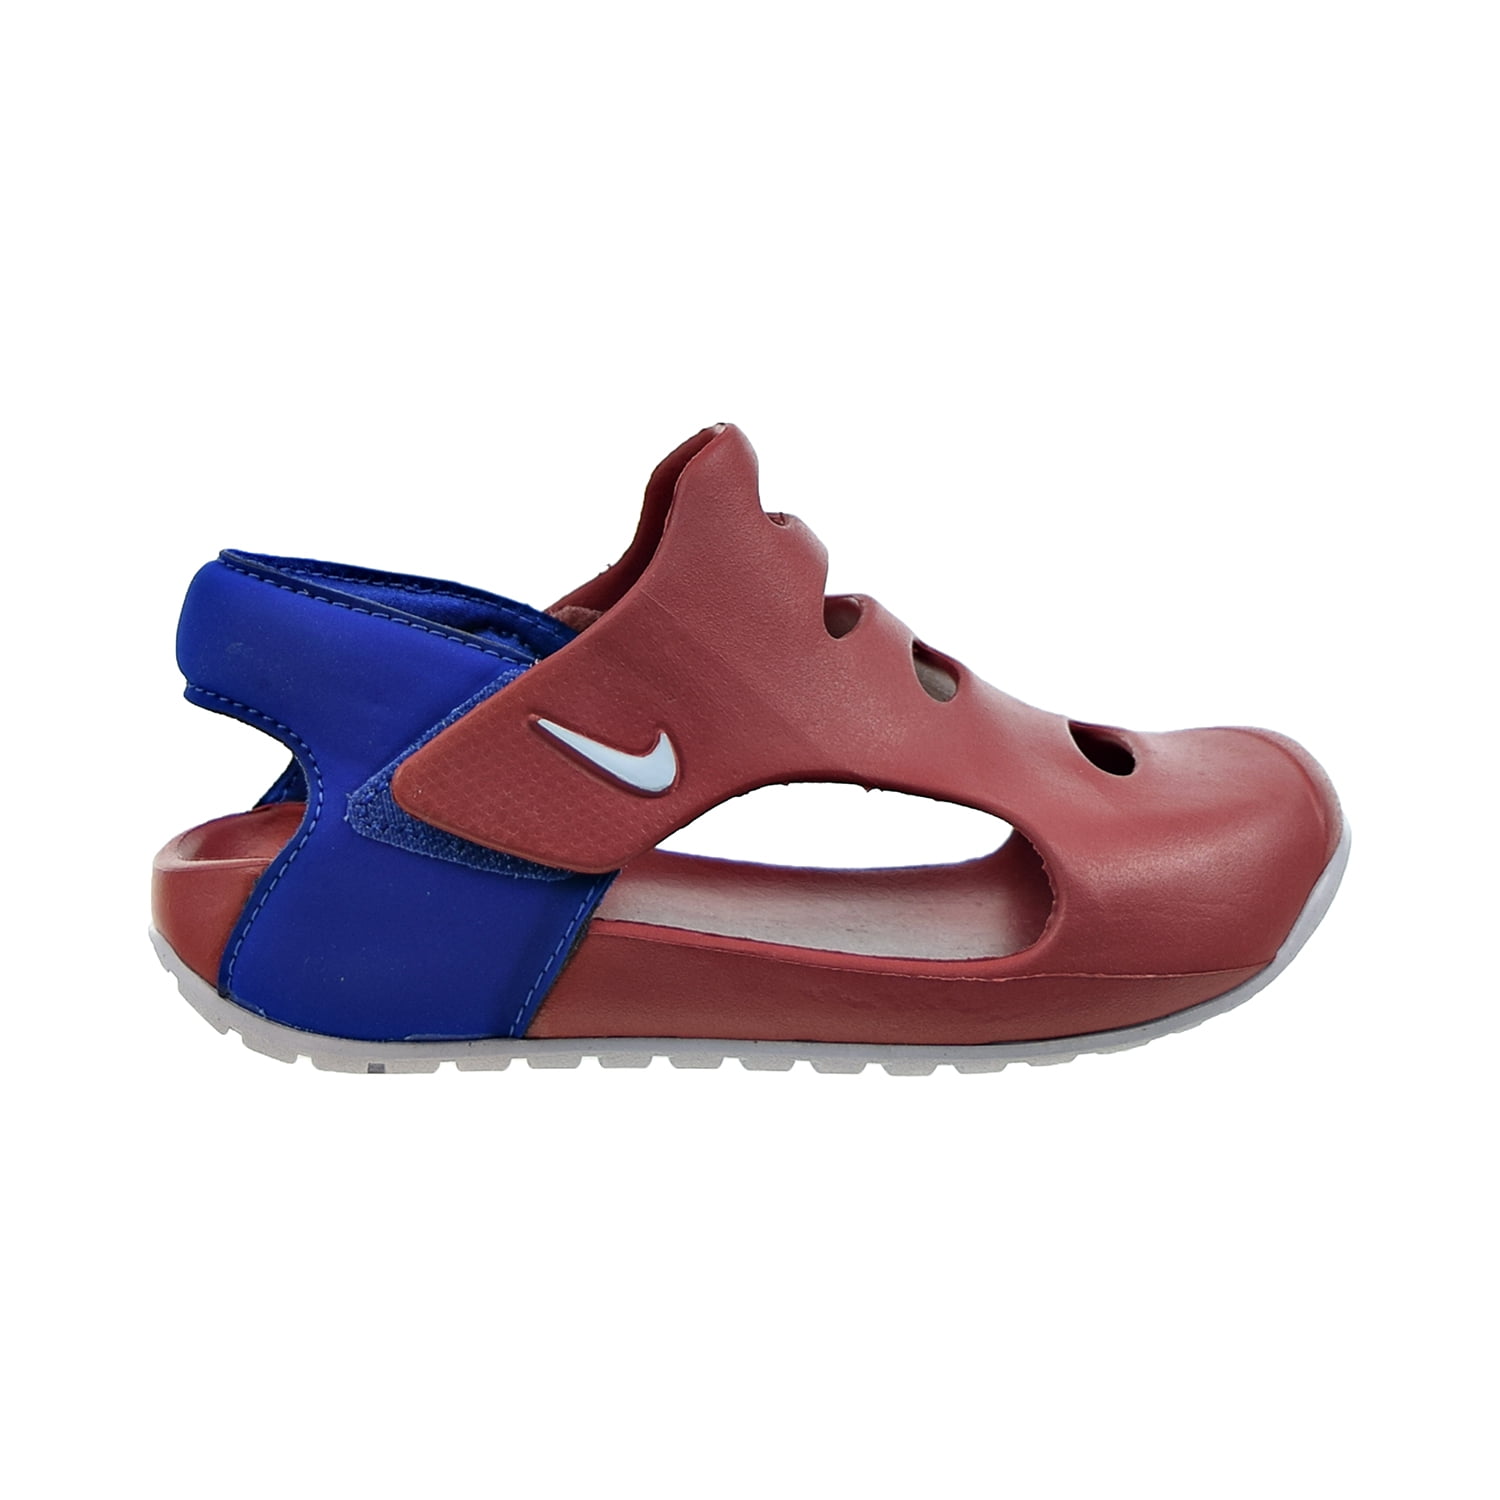 Nike 3 (PS) Little Kids' Sandals Canyon Rust-Game Royal dh9462-600 -